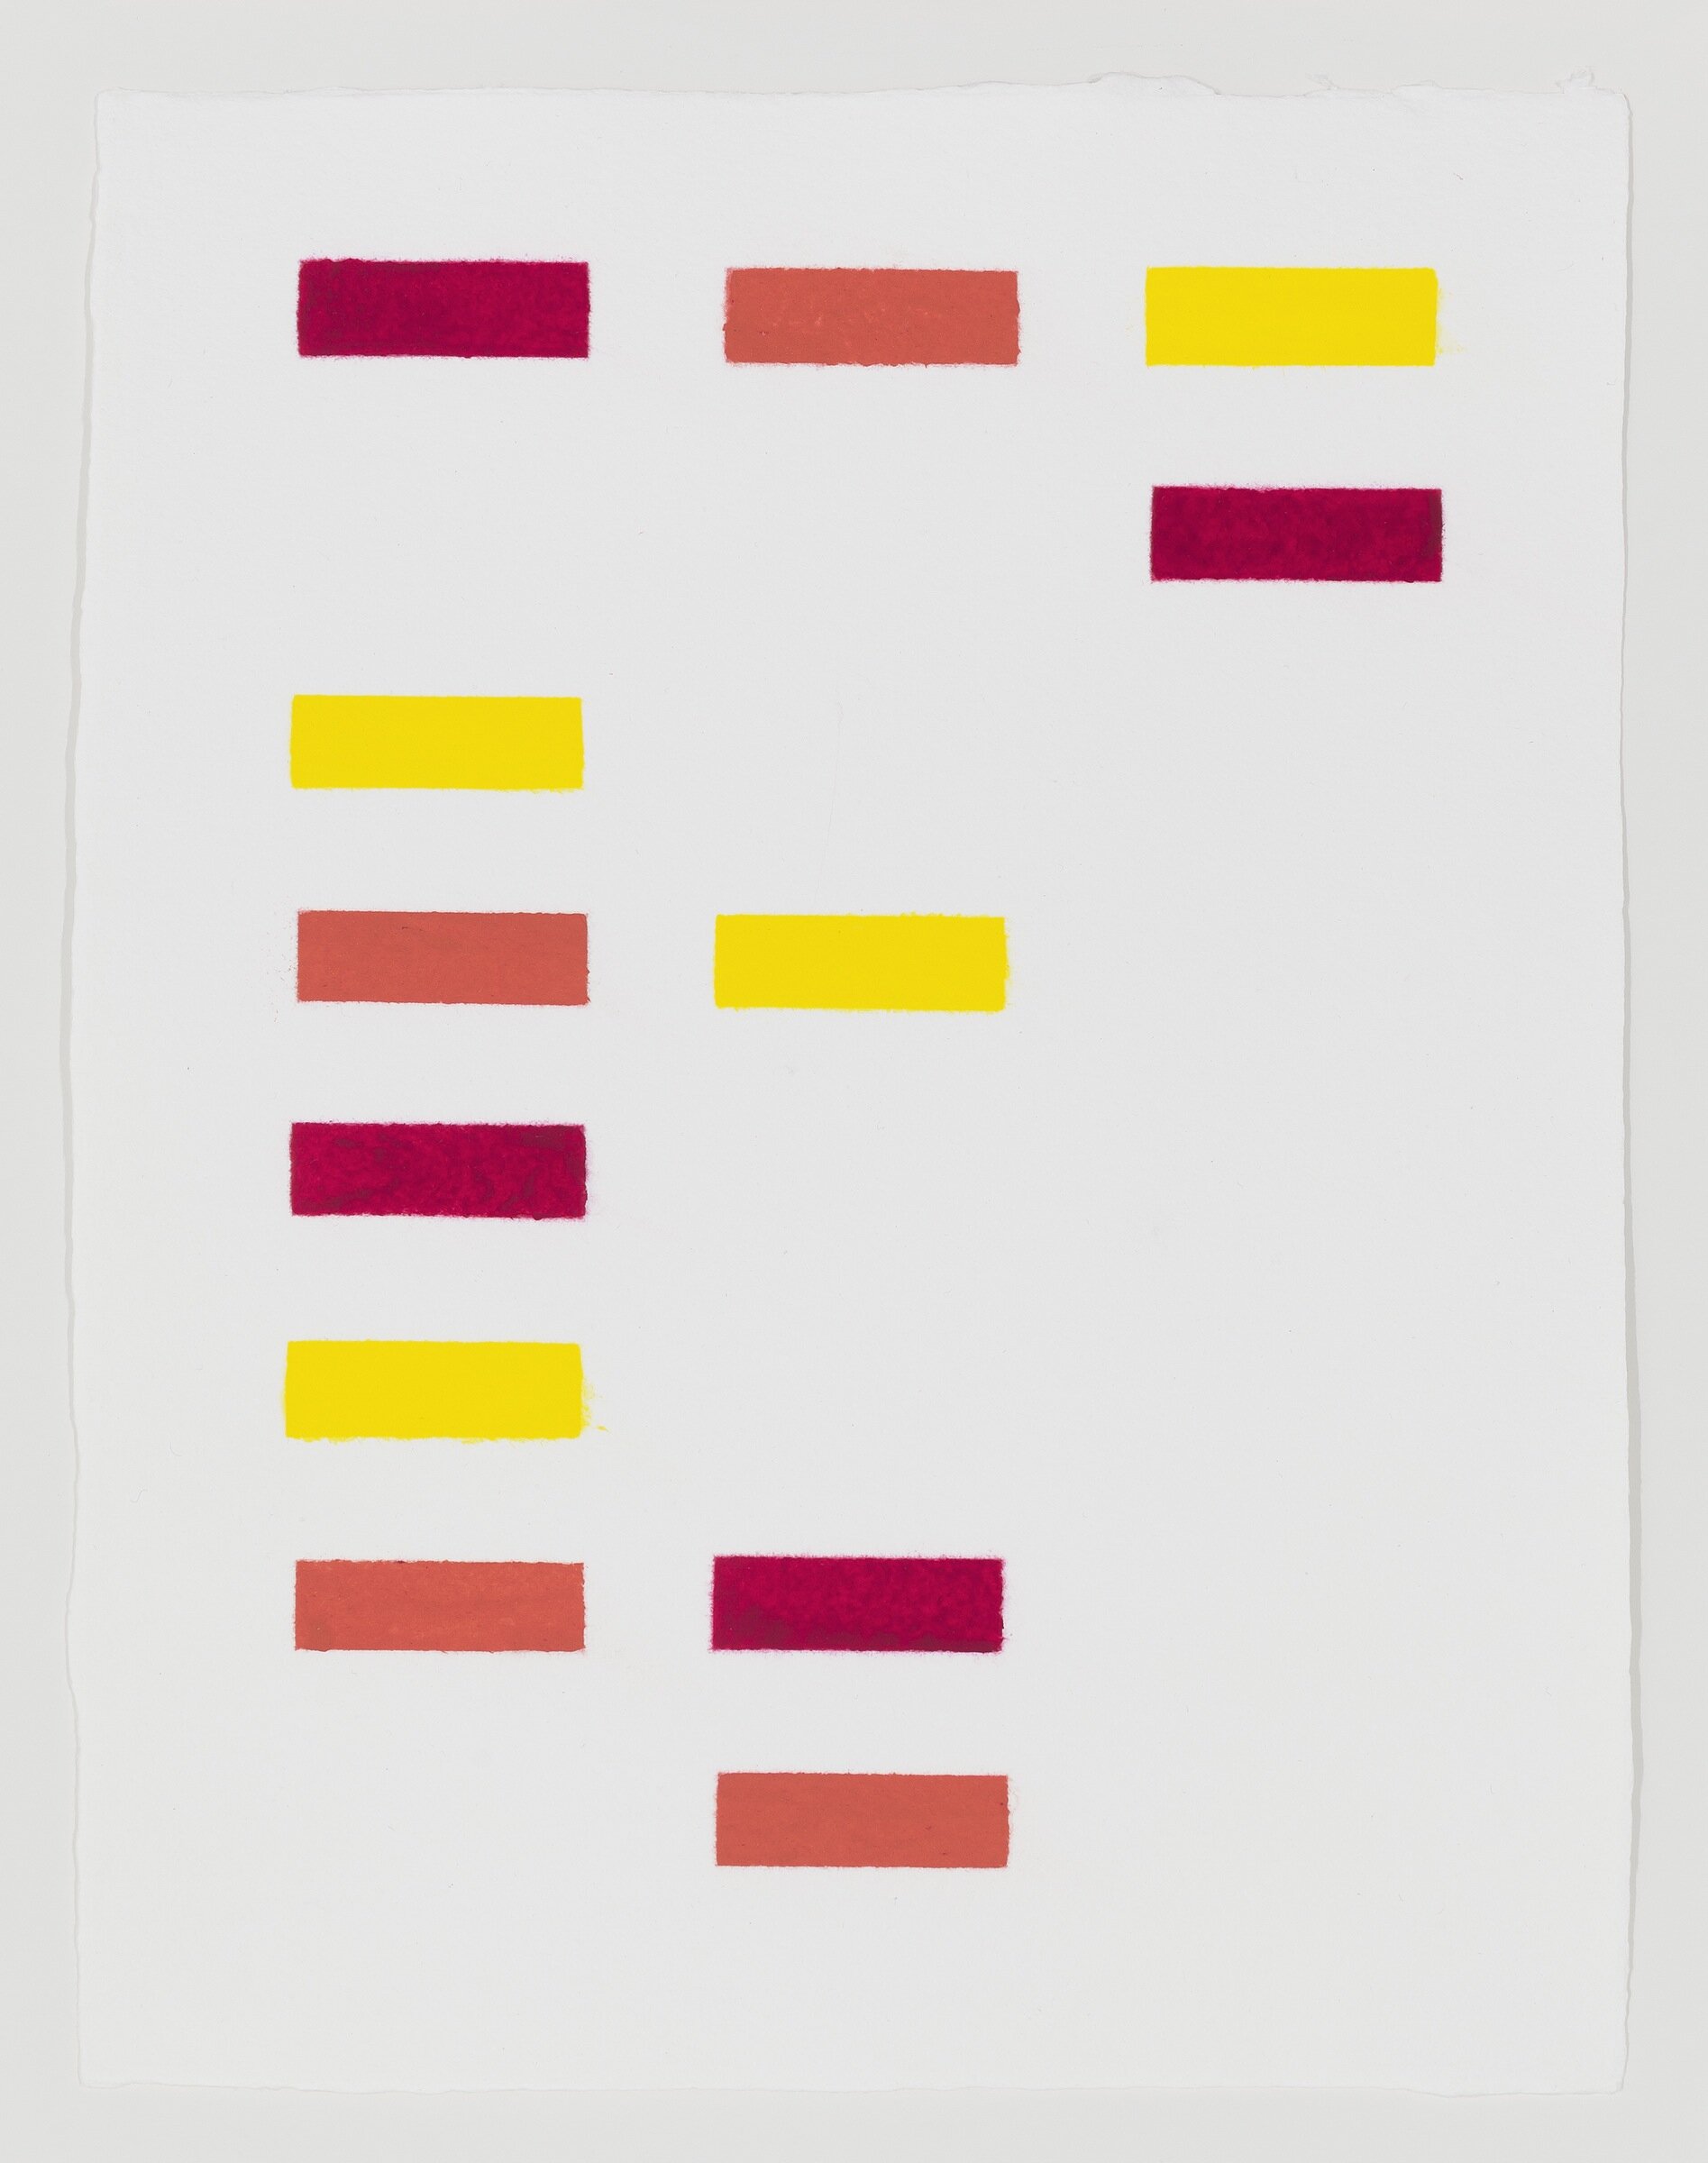  James Siena,  Logic Package: Orange,  2013-2014, Pigmented linen pulp on cotton base sheet, 16.5 x 12.75 inches.  